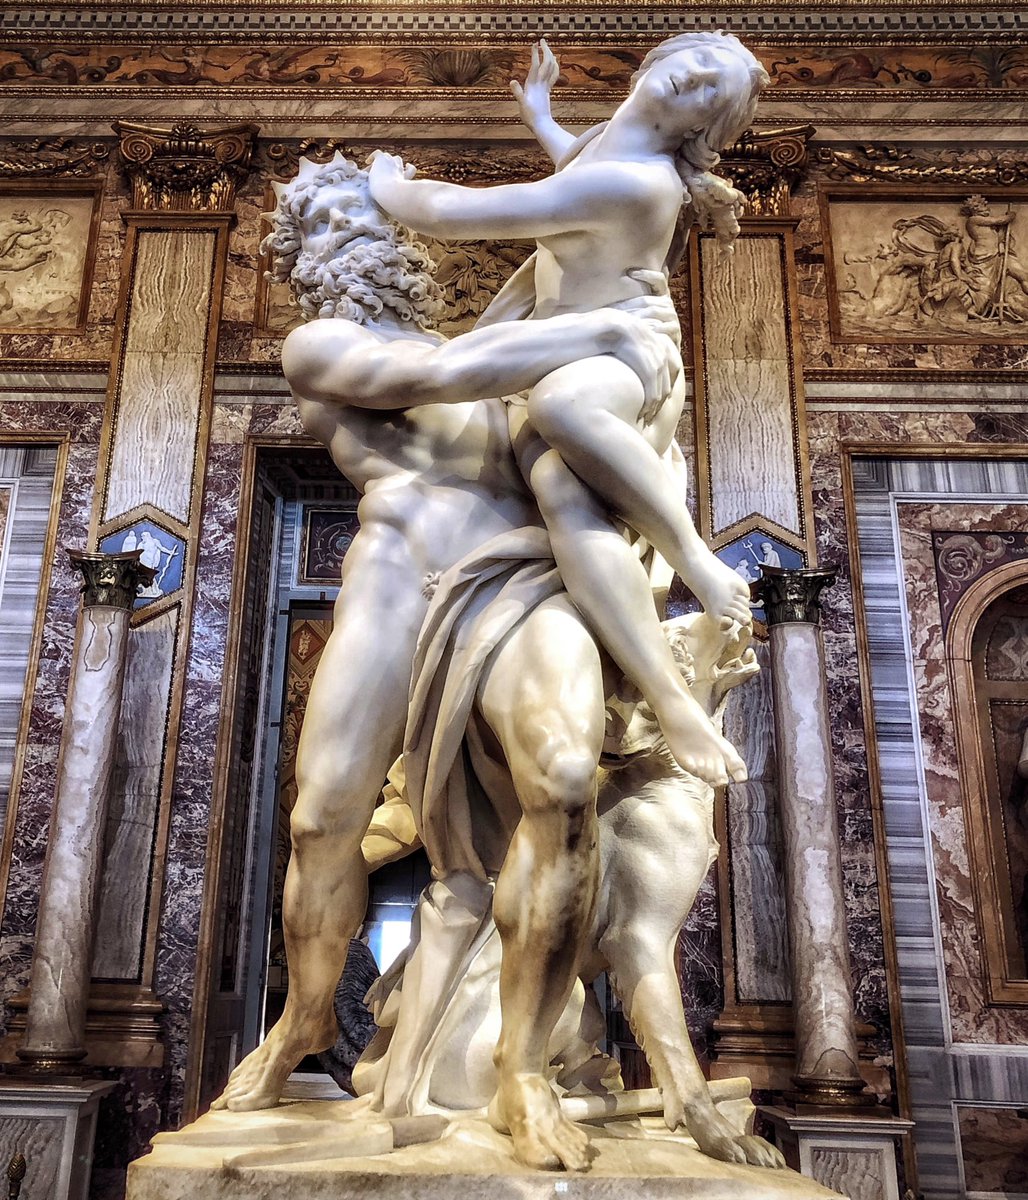 Meat or marble? Astounding as marble comes to life • The Rape of Proserpina•Gian Lorenzo Bernini(1621-1622 ) Galleria Borghese in Rome✨
 #StoneworkSunday